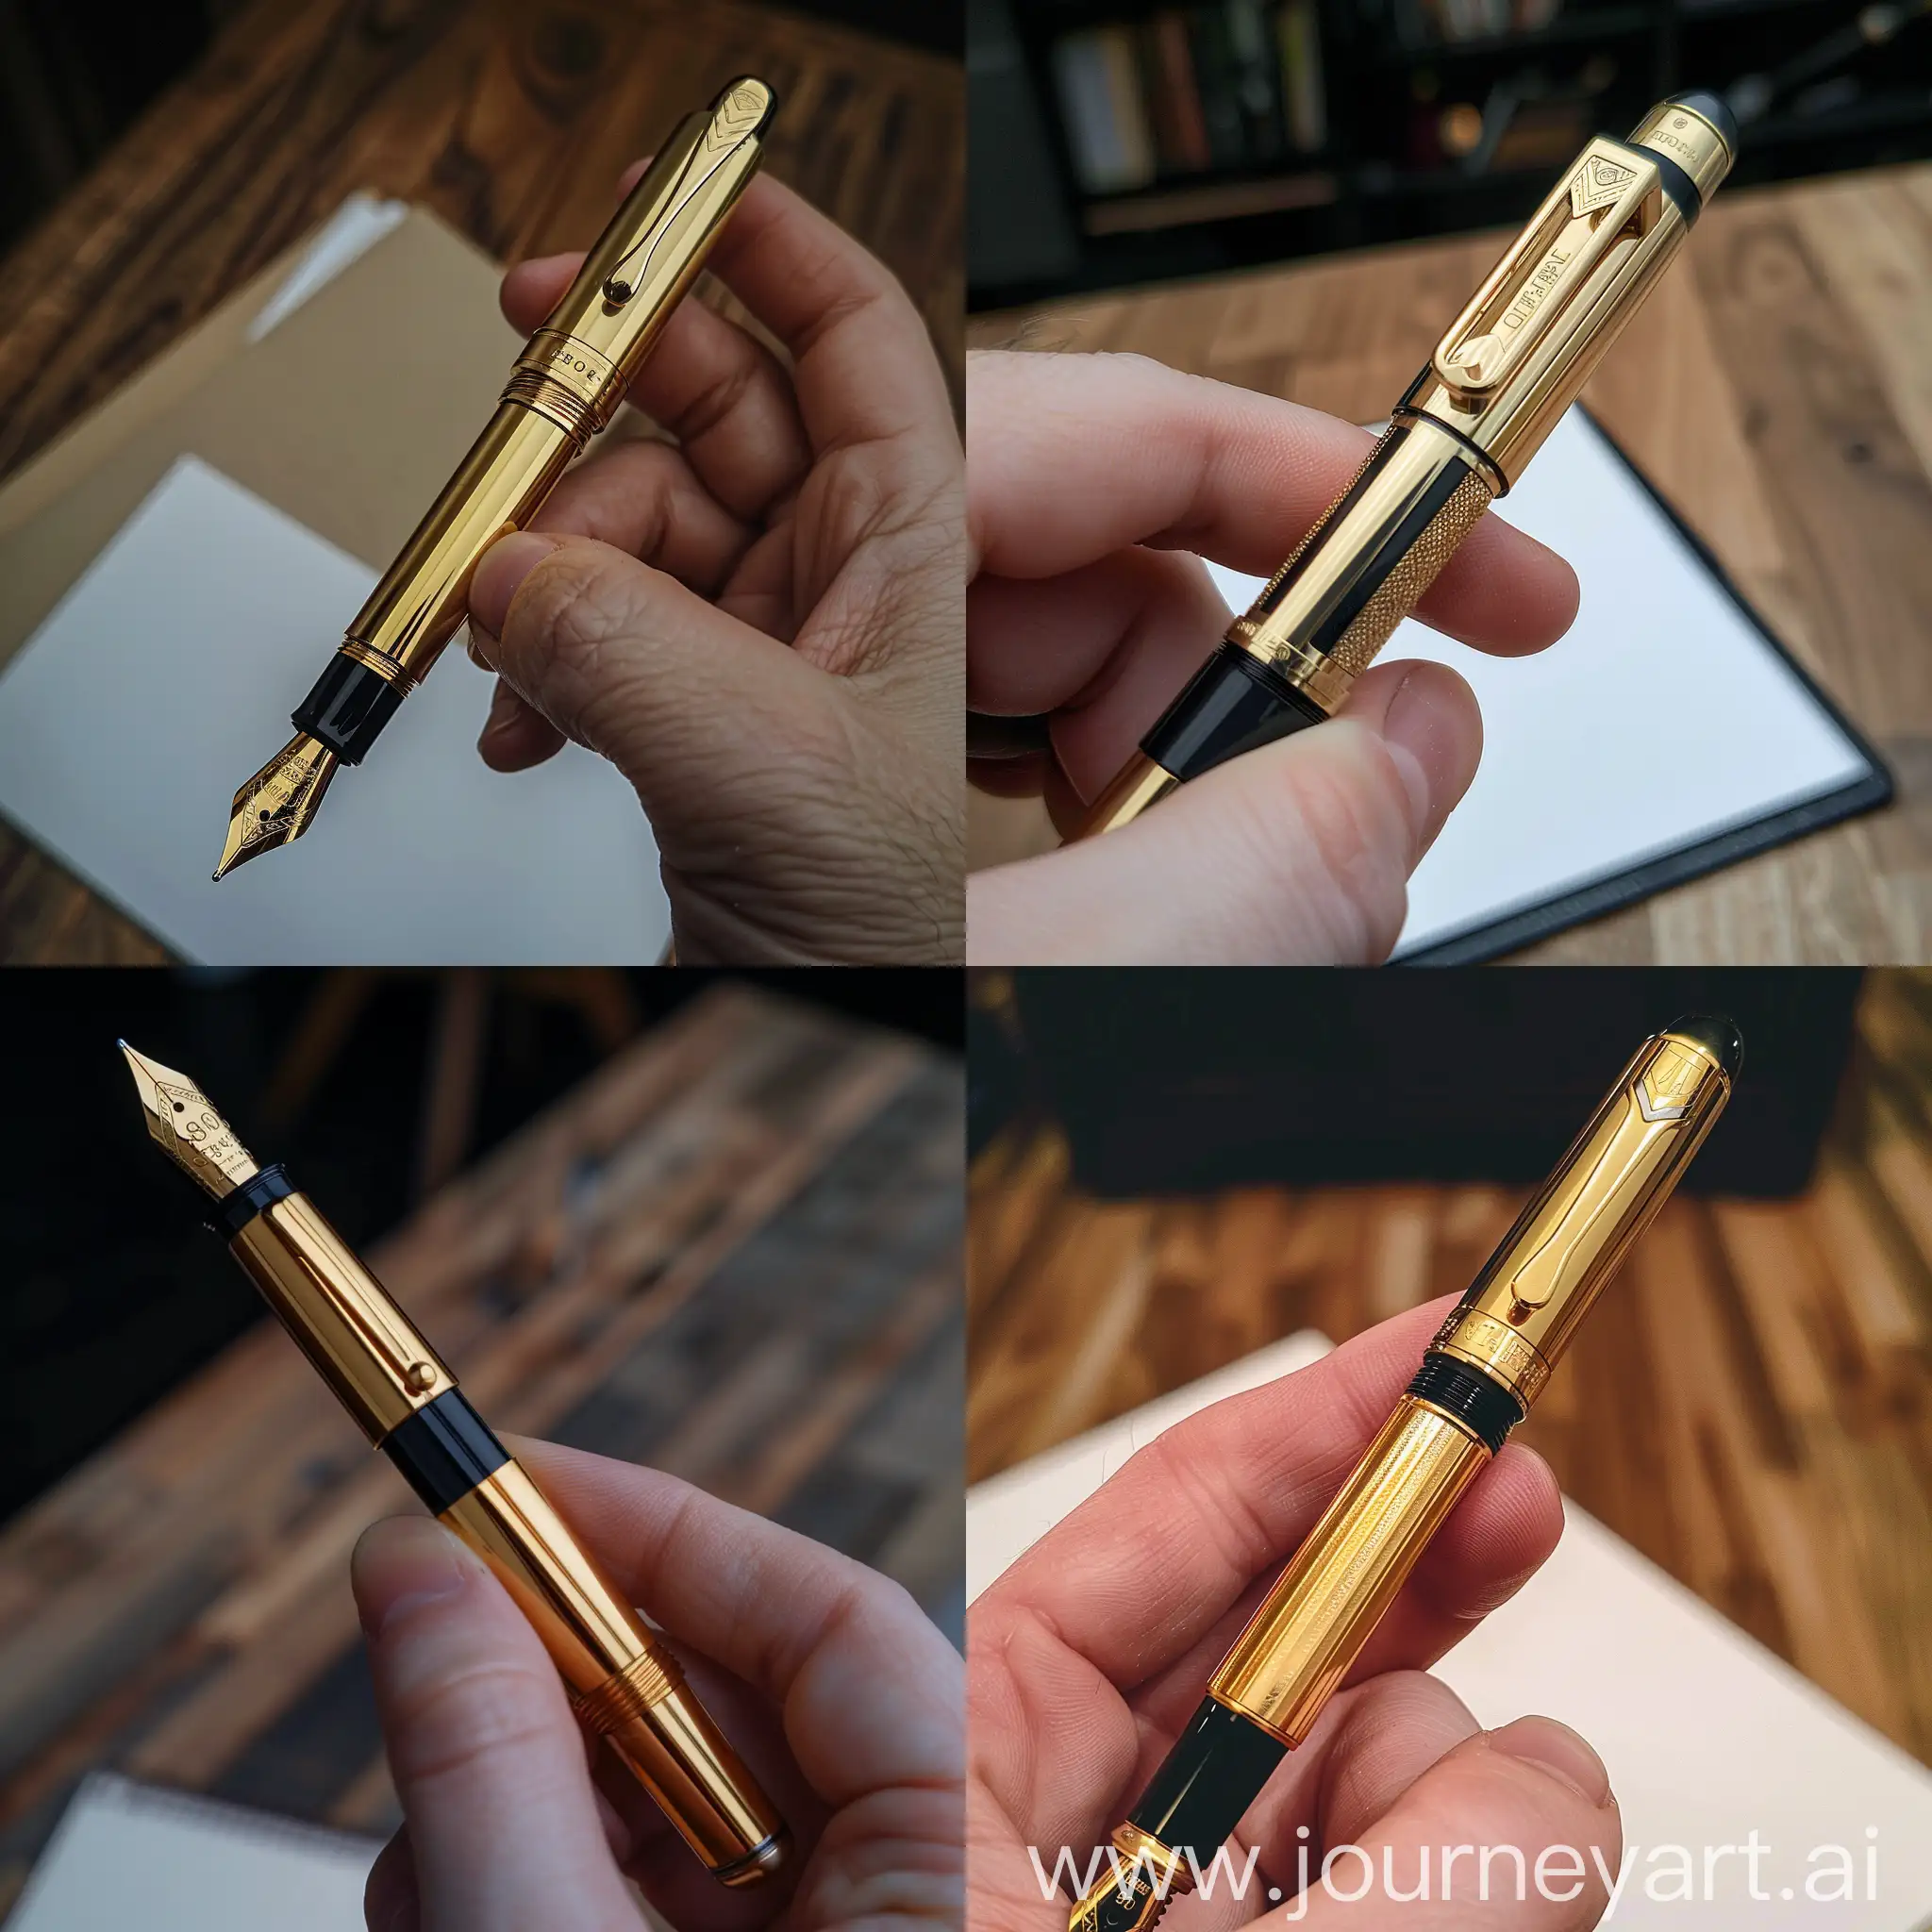 CloseUp-of-Hand-Holding-Gold-Fountain-Pen-on-Table-at-Night